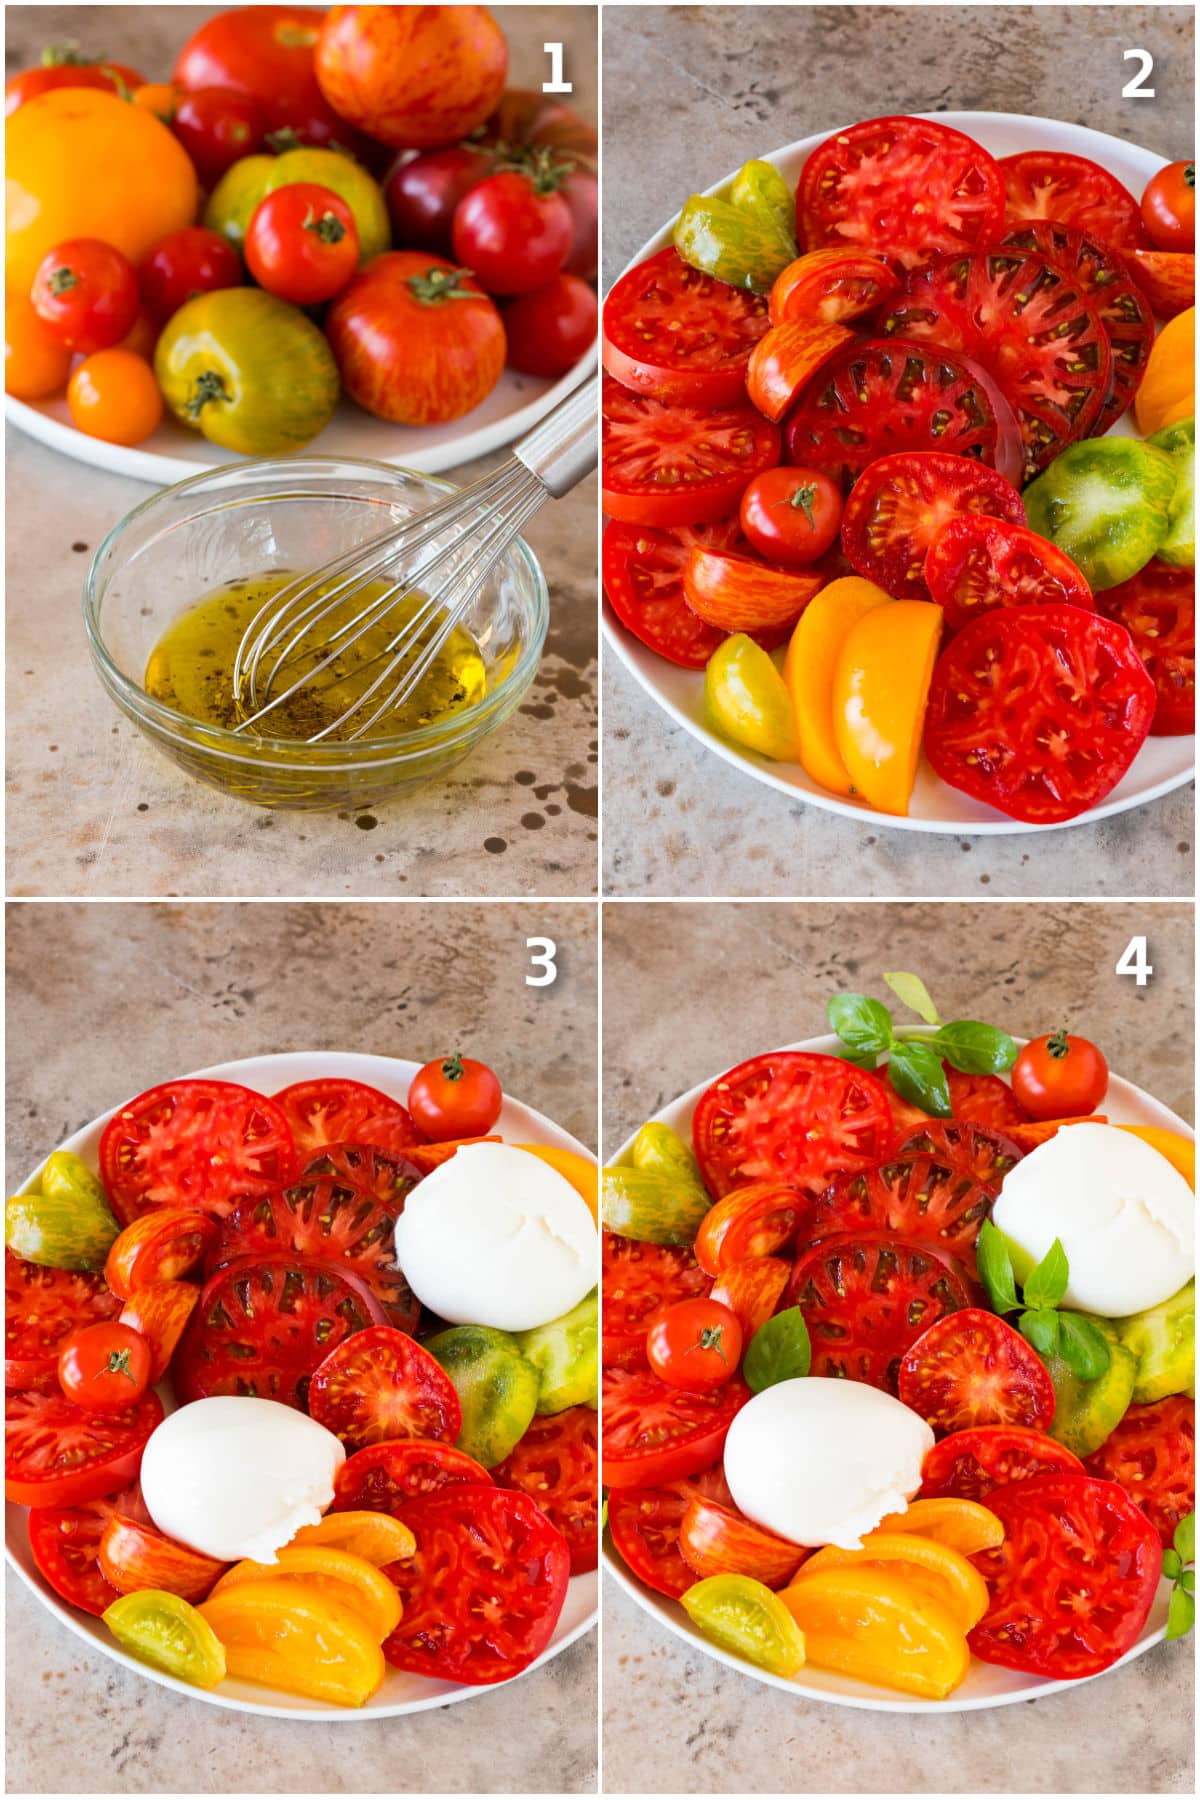 Step by step process shots showing how to make burrata salad.